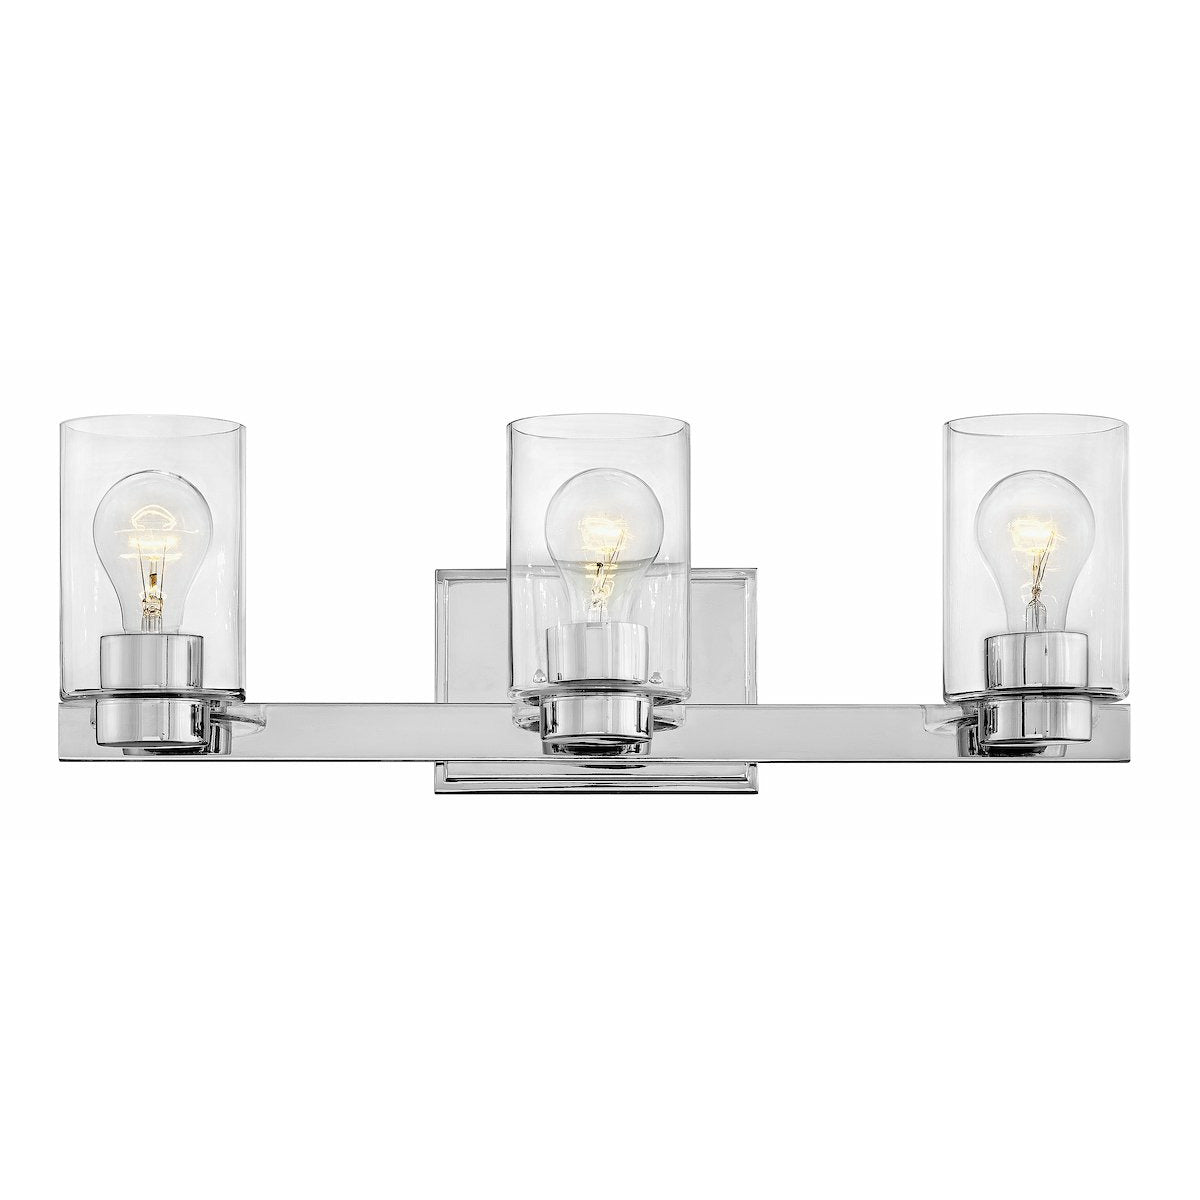 Miley Vanity Light Chrome with Clear glass